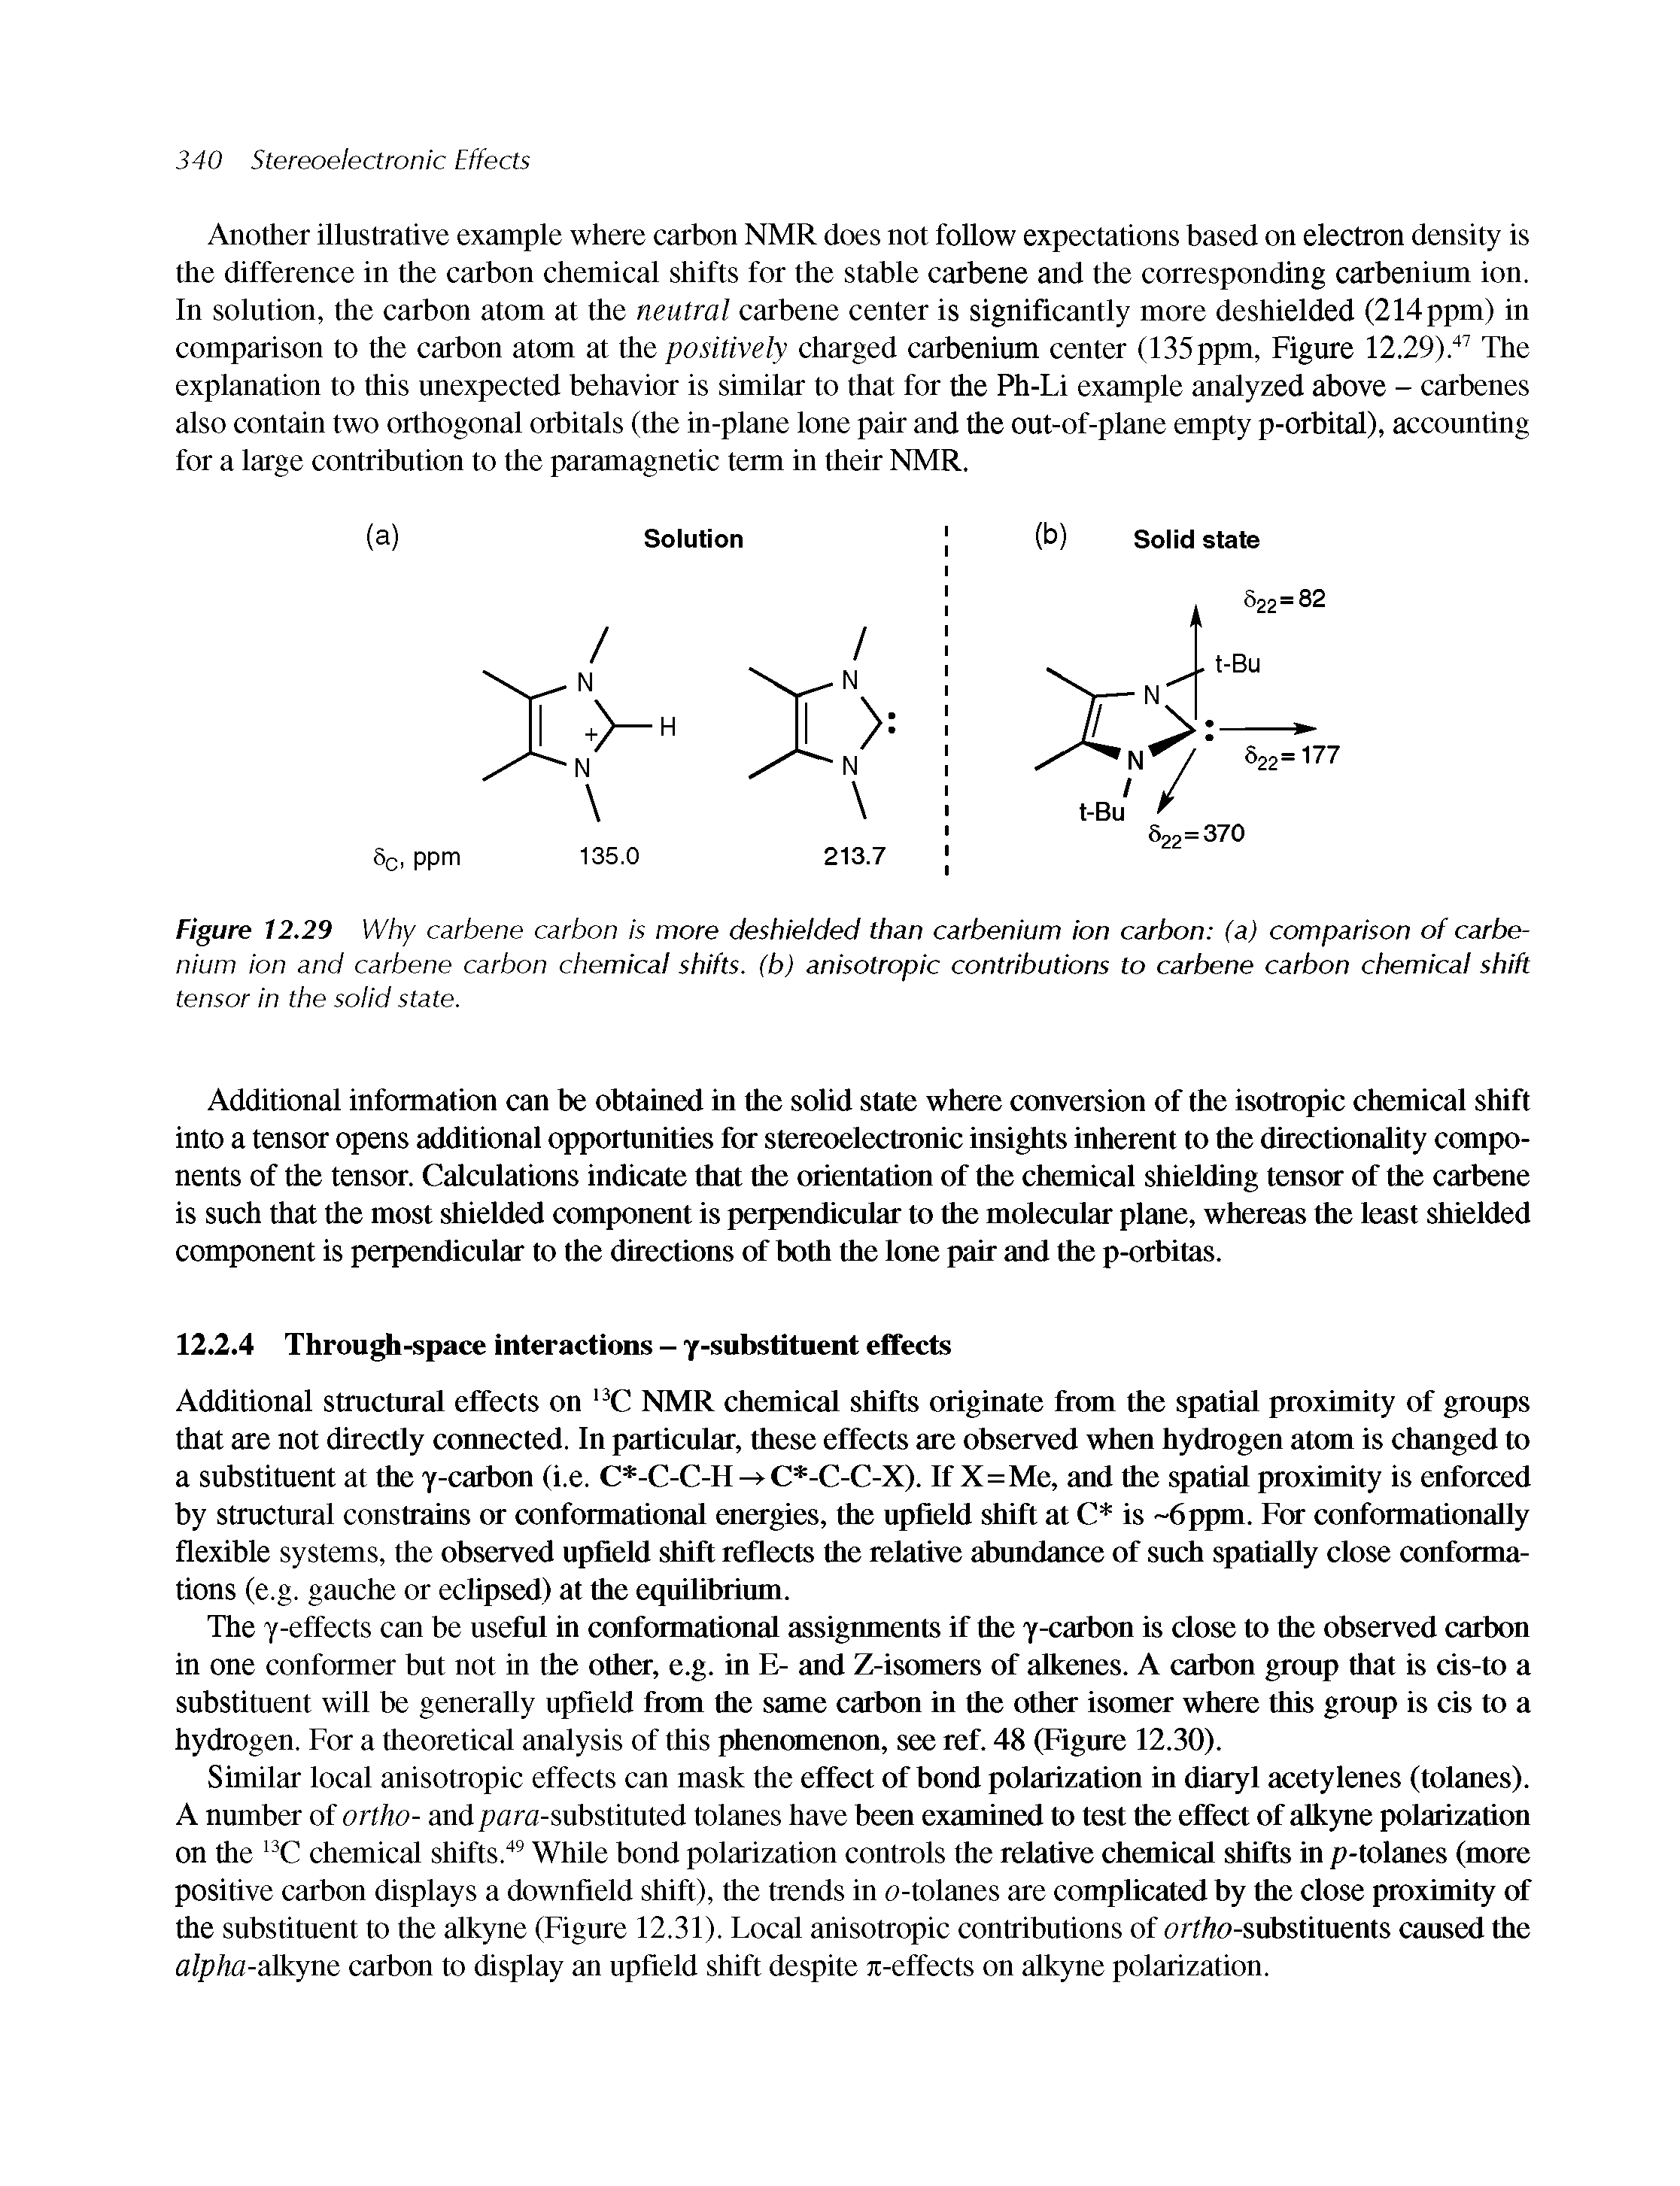 Figure 12.29 Why carbene carbon is more deshielded than carbenium ion carbon (a) comparison of carbenium ion and carbene carbon chemical shifts, (b) anisotropic contributions to carbene carbon chemical shift...